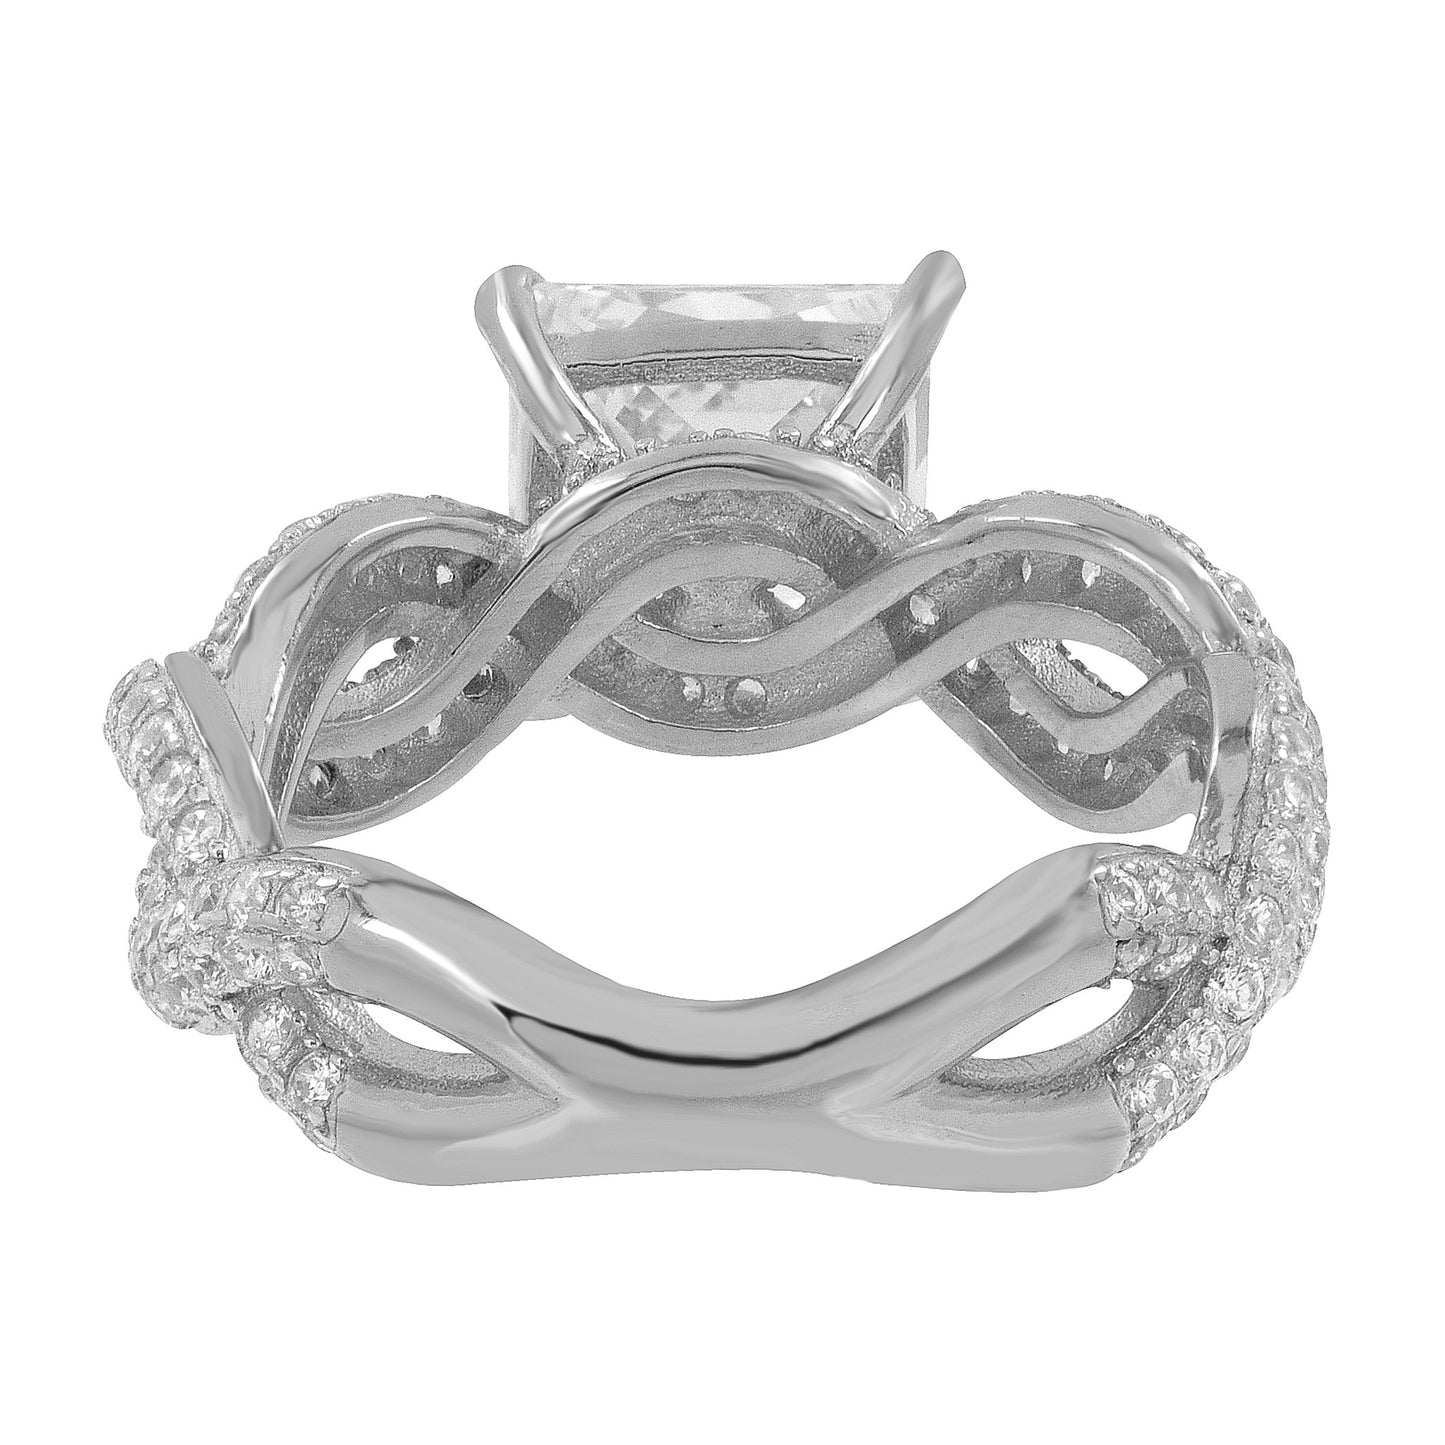 Princess Cut Square Ring Wedding Engagement Infinity Style